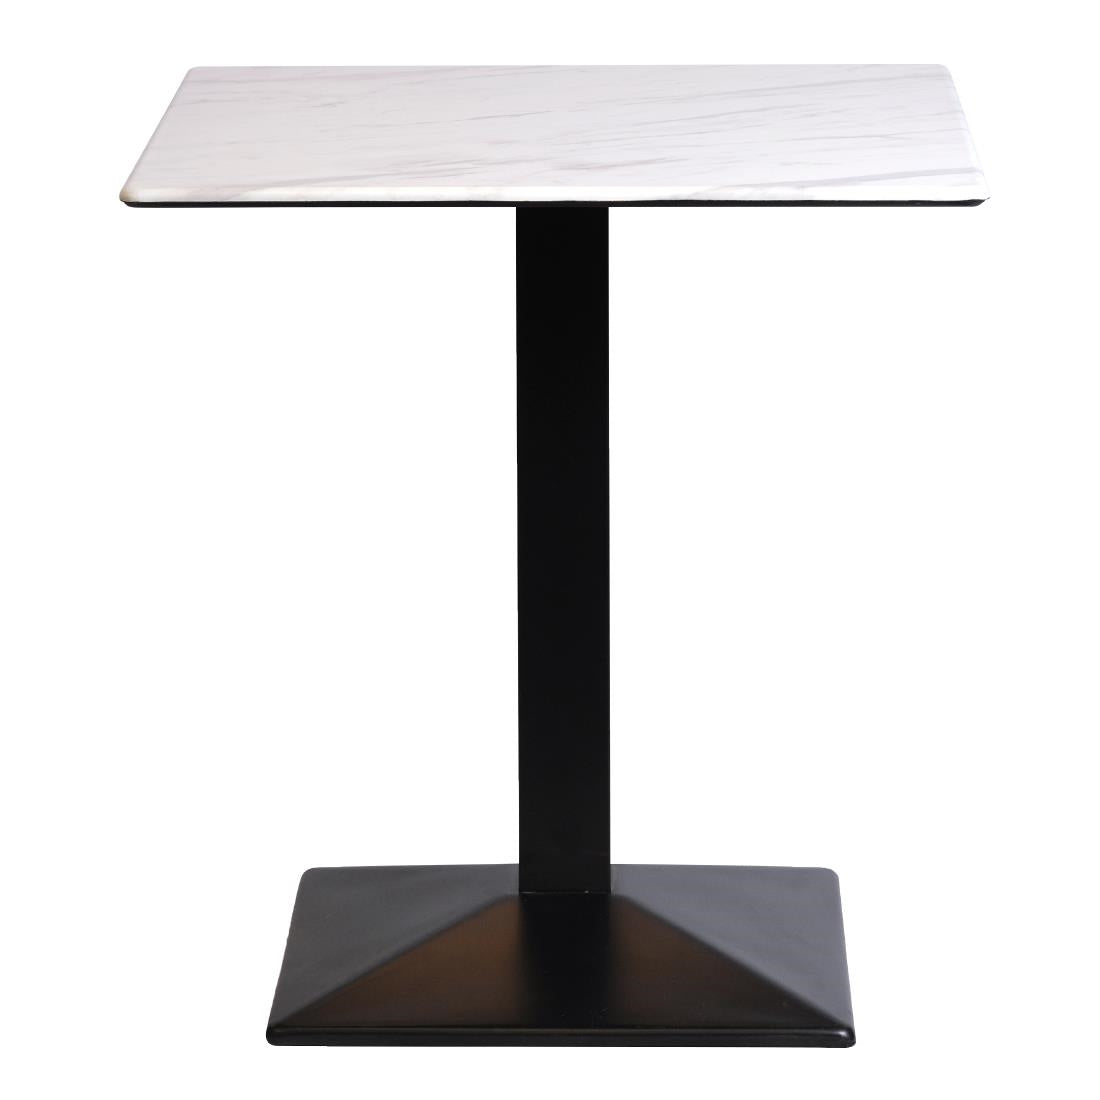 CZ810 Turin Metal Base Square Dining Table with Laminate Top Marble 600mm JD Catering Equipment Solutions Ltd